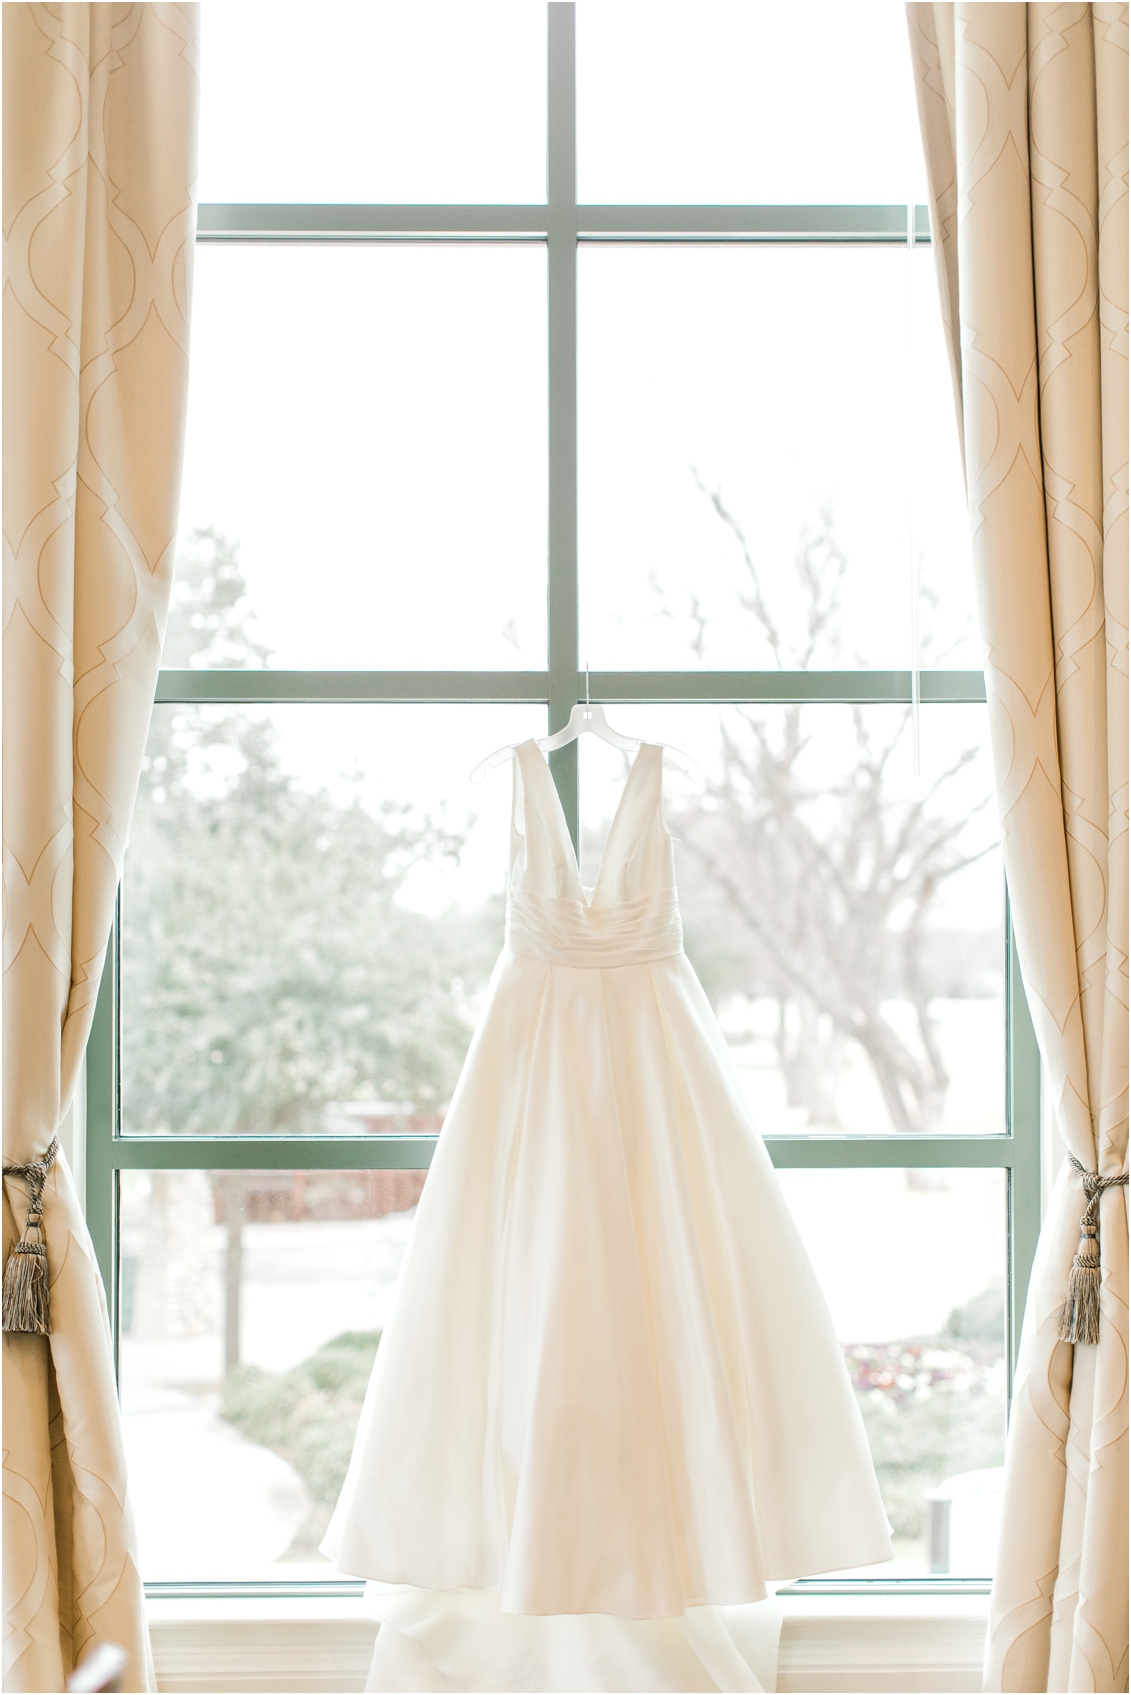 Fort Worth, Texas Wedding at River Crest Country Club by Gaby Caskey Photography, wedding dress hanging photo